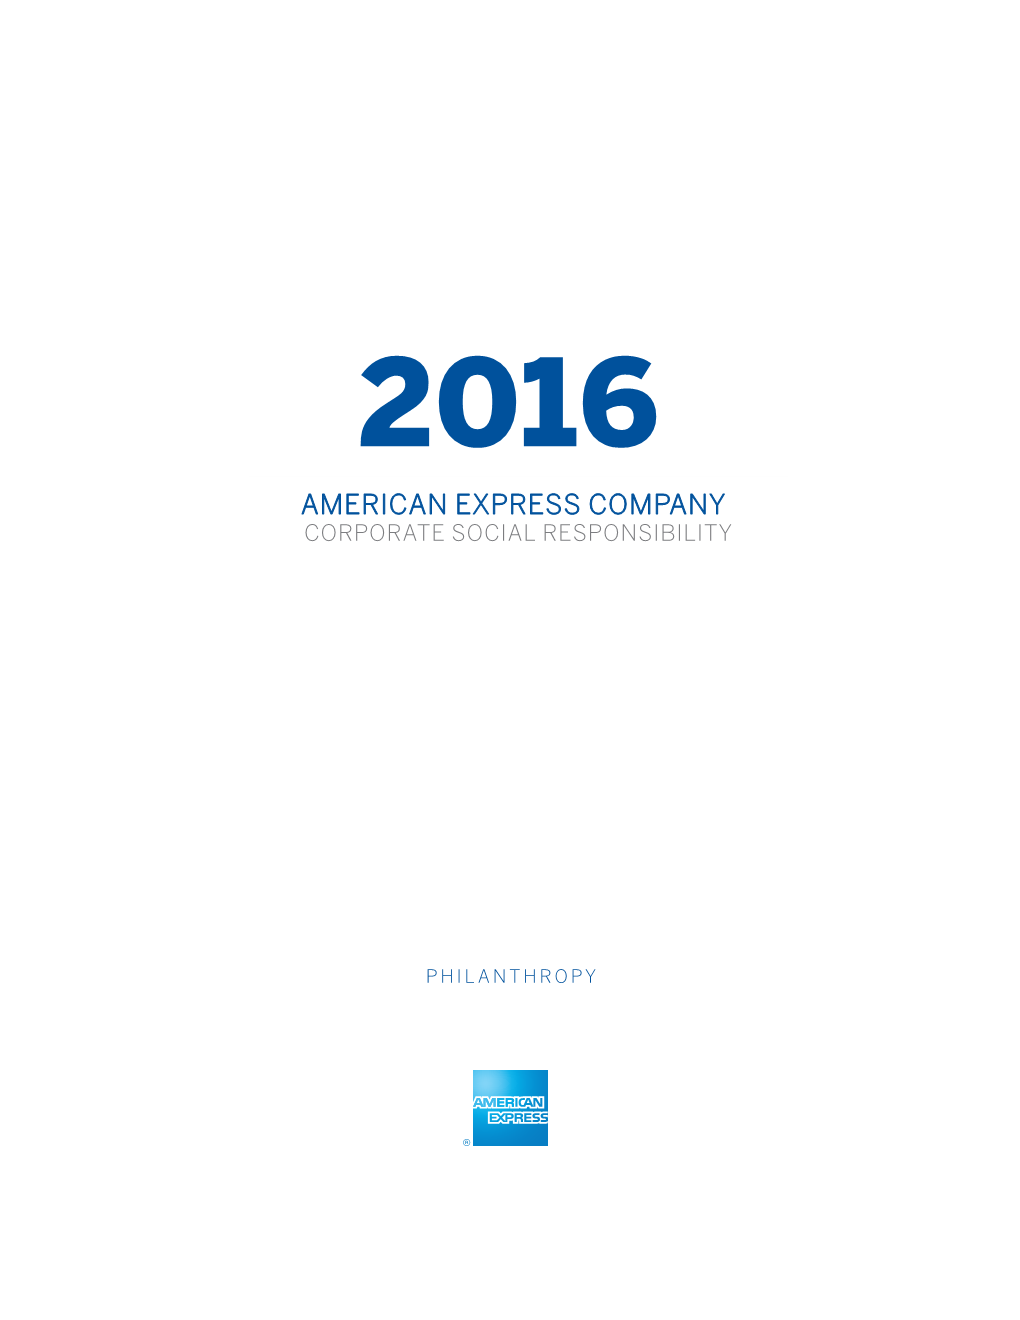 American Express Company Corporate Social Responsibility